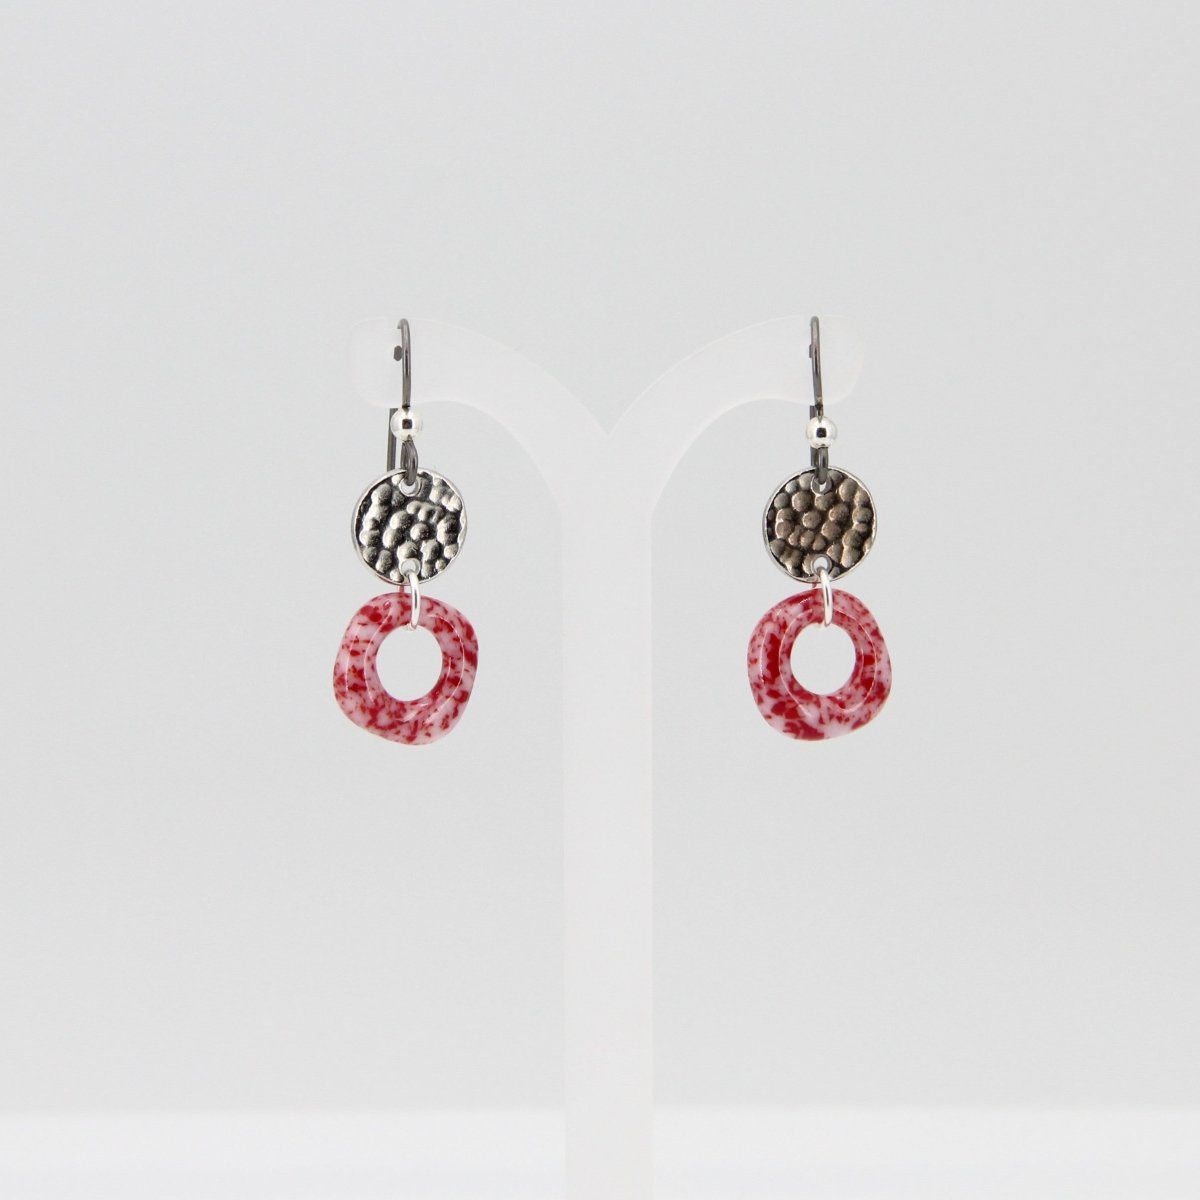 Red and White Glass Earrings with Circle Charms